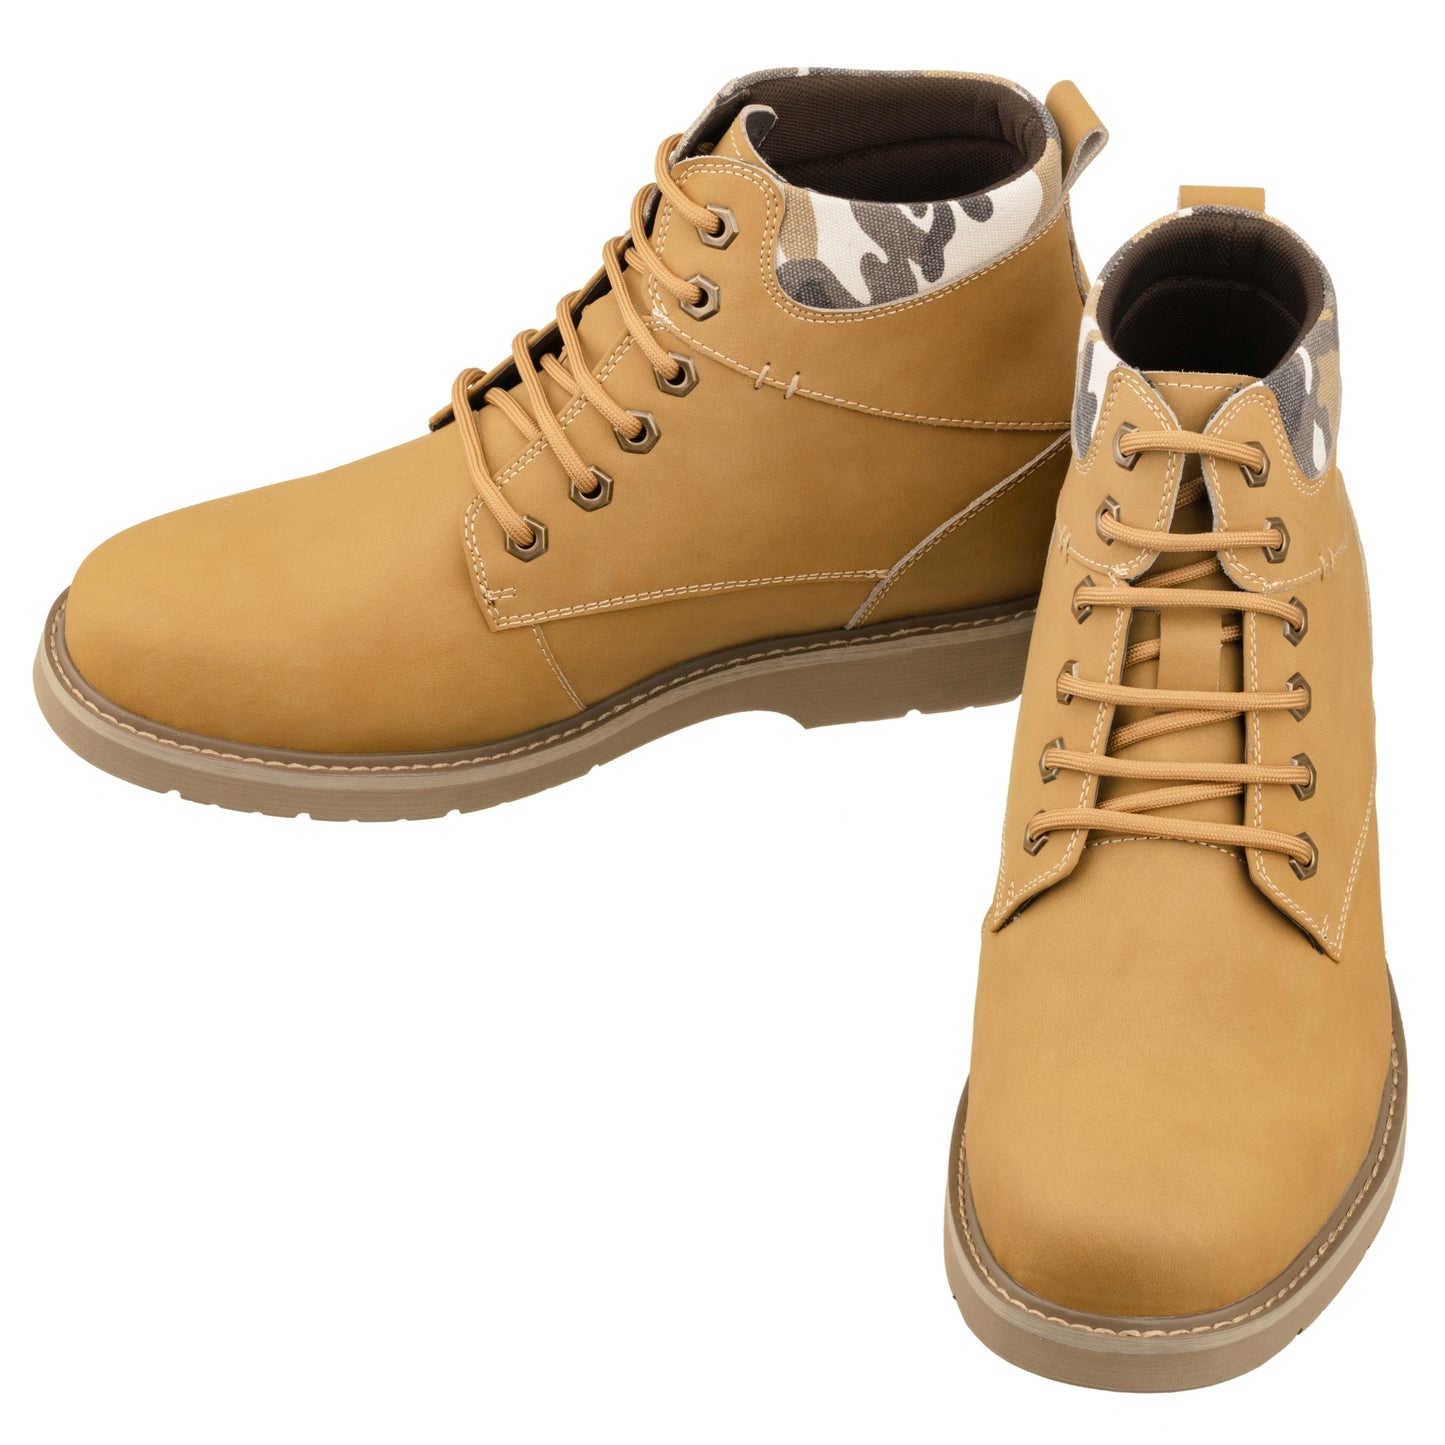 Elevator shoes height increase CALTO - YH7830 - 3.2 Inches (Khaki) - Nubuck Boots